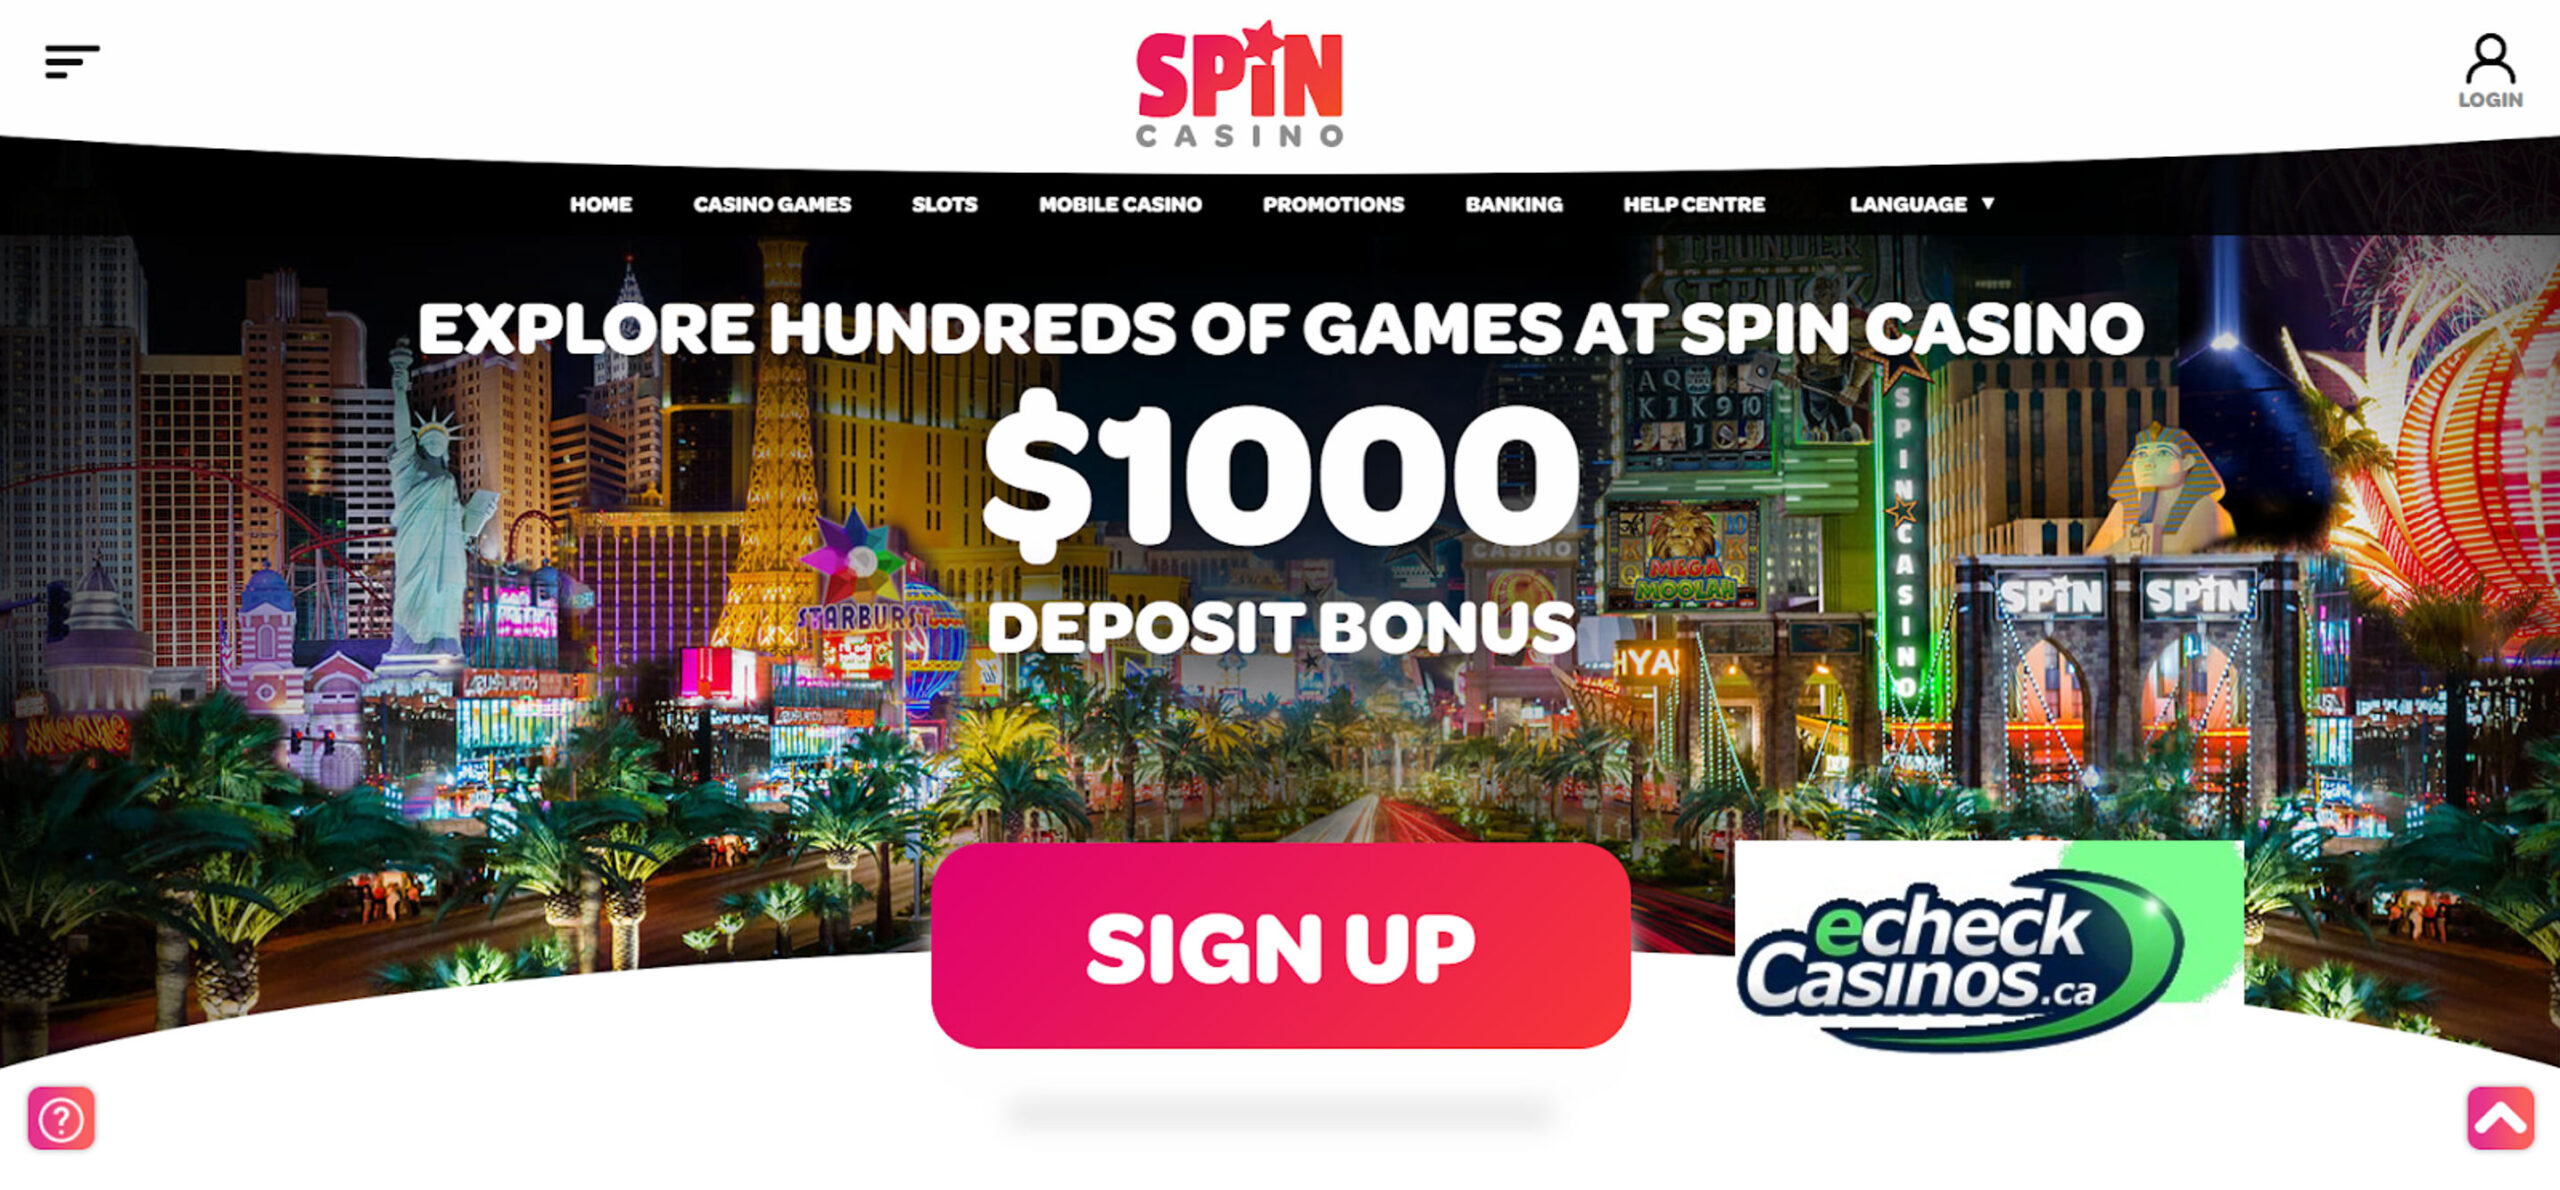 Spin Casino eCheck Review